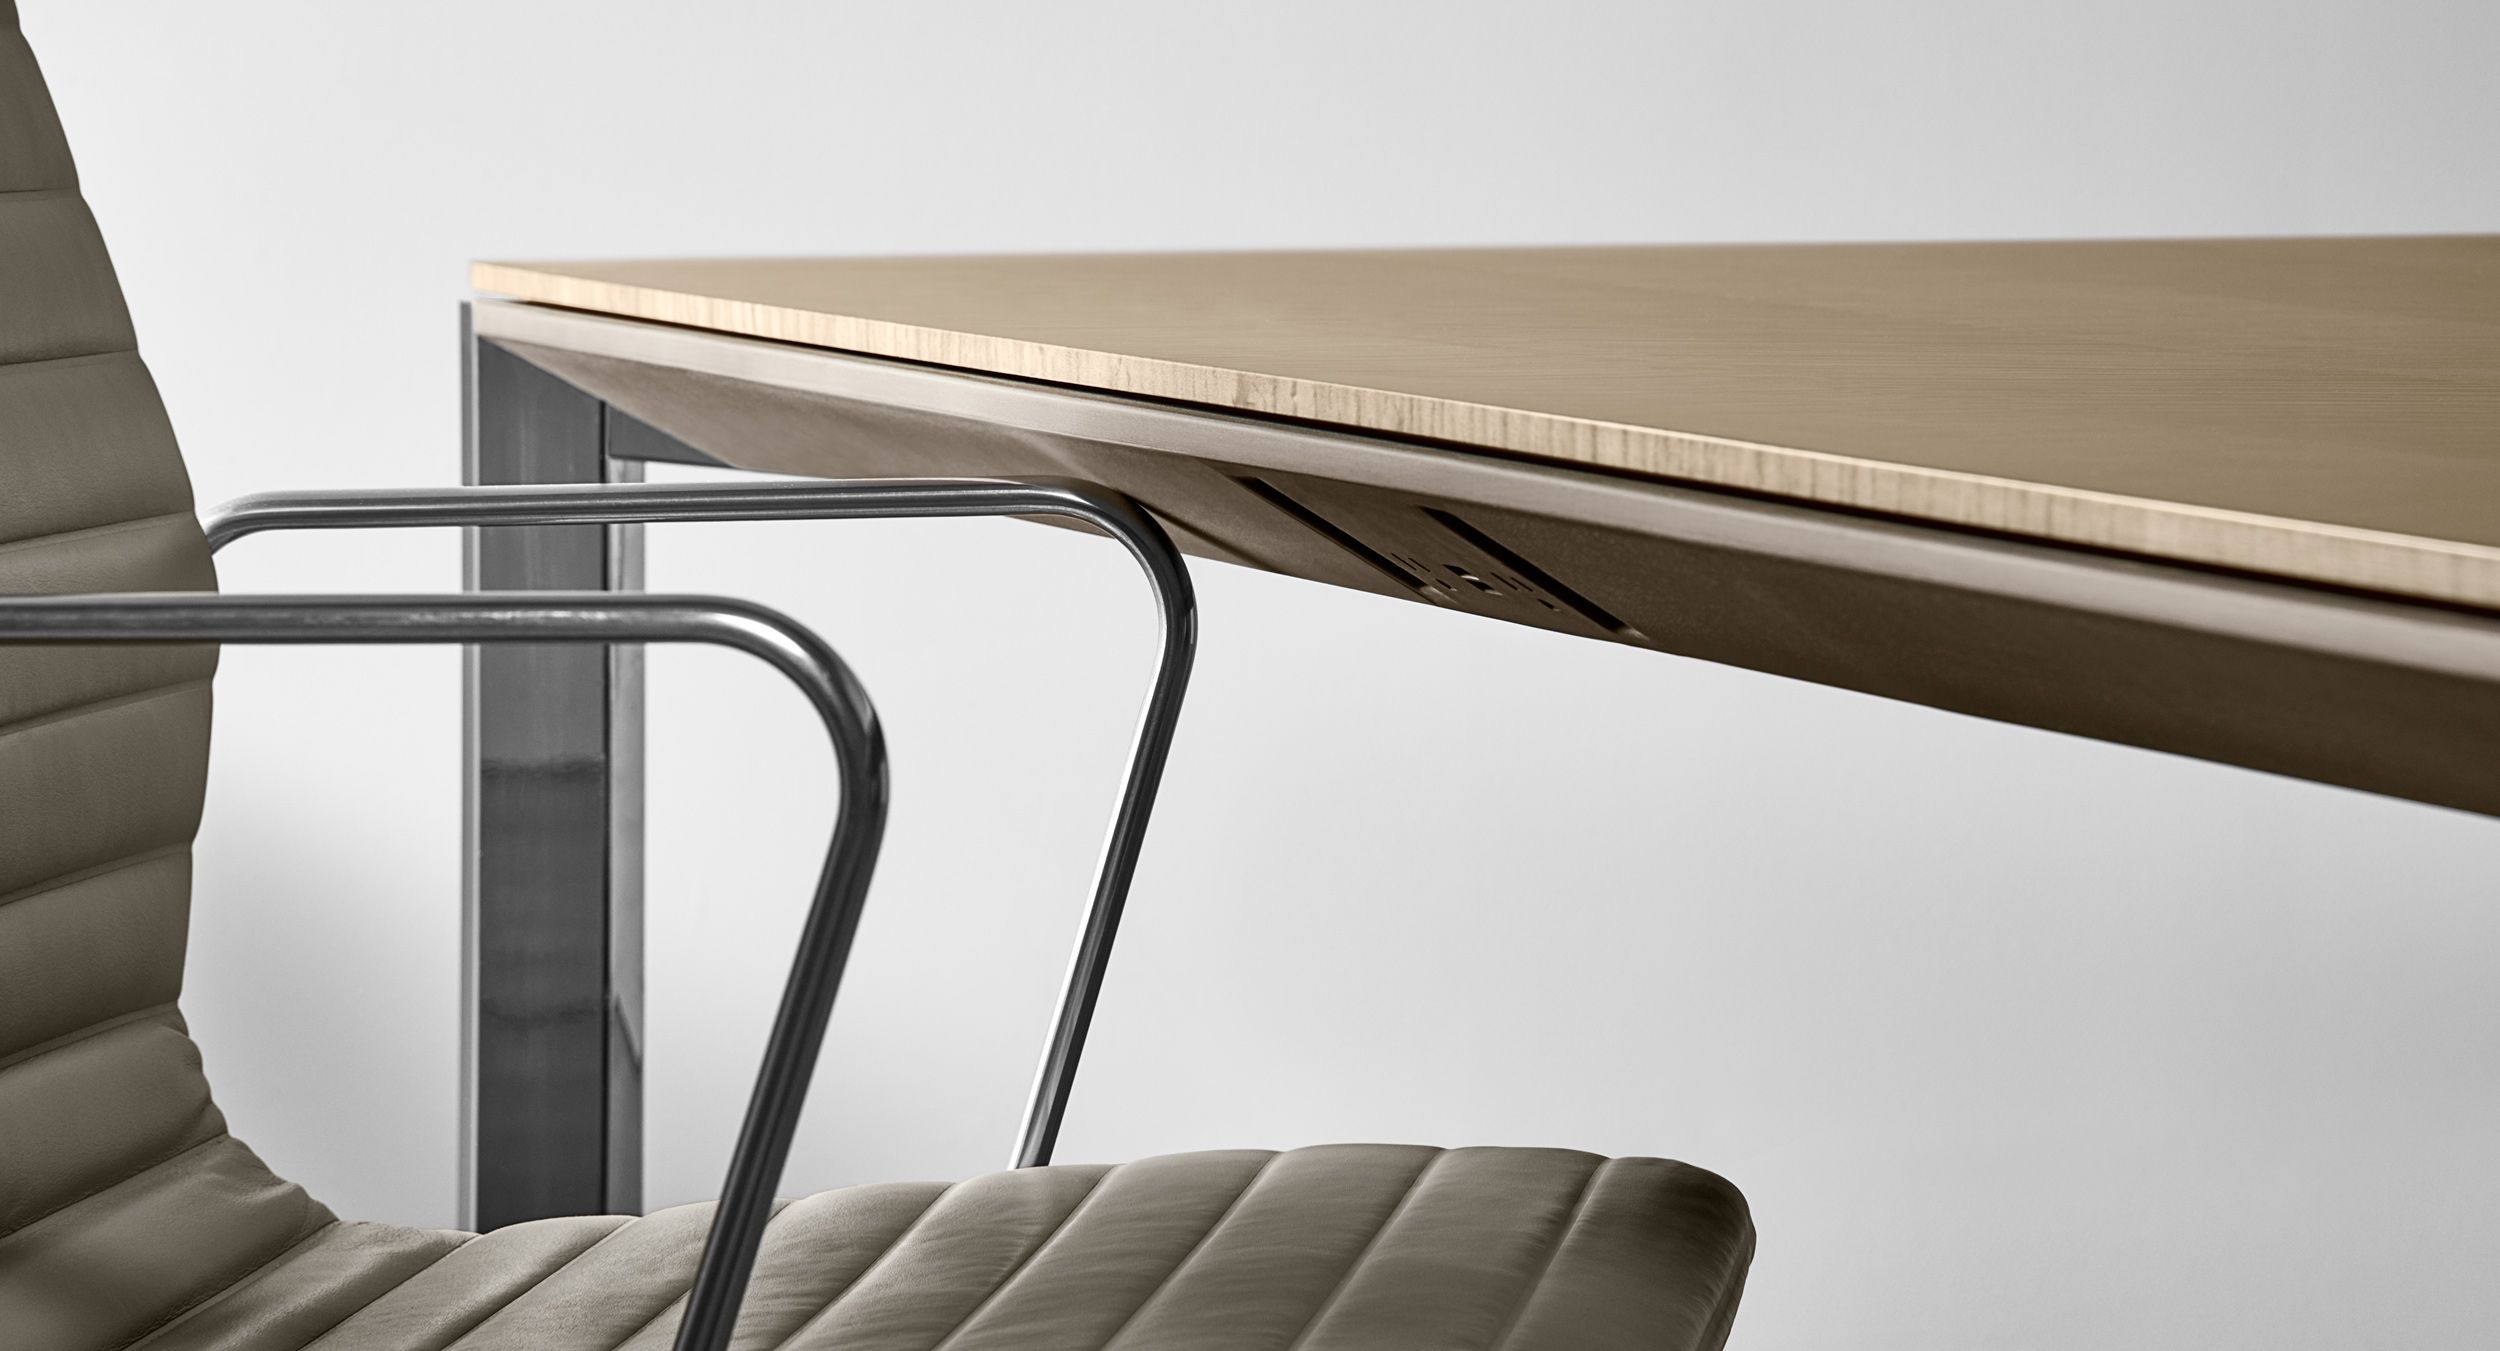 The revolutionary soft Halo edge protects both table and chair from damage. <br> Patent US11154130B2